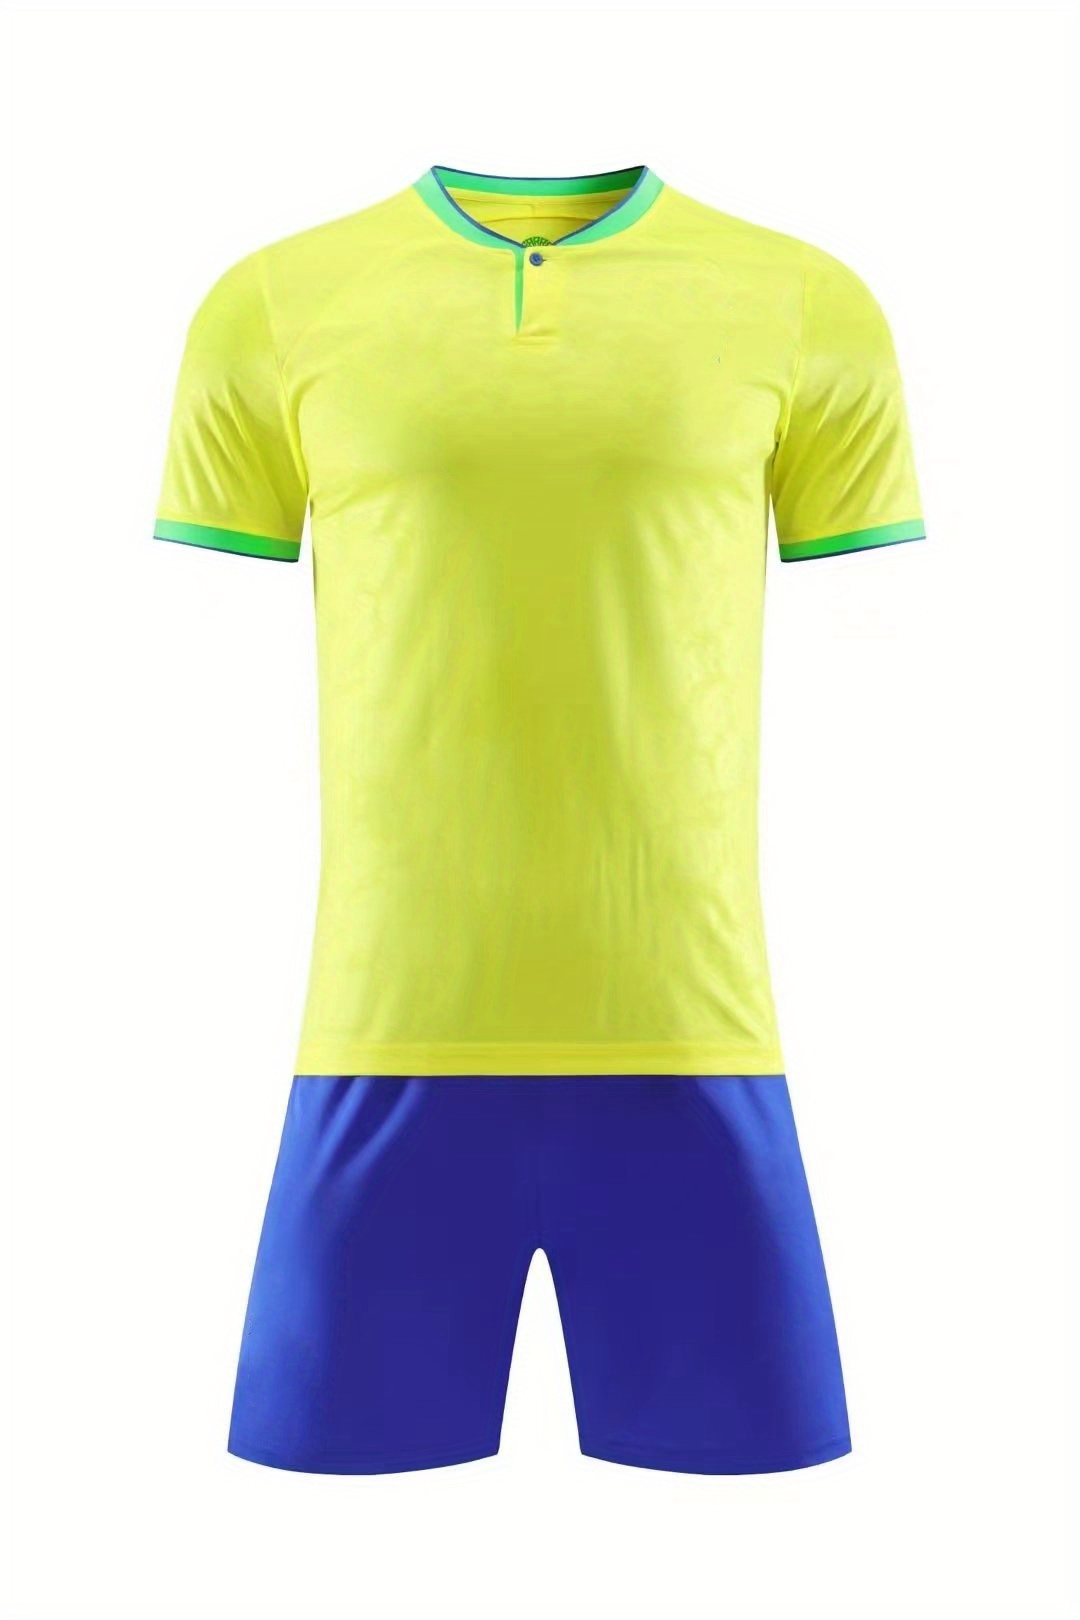 Mens Sports Suit Mens Yellow Sports Short Sleeves Football Jersey